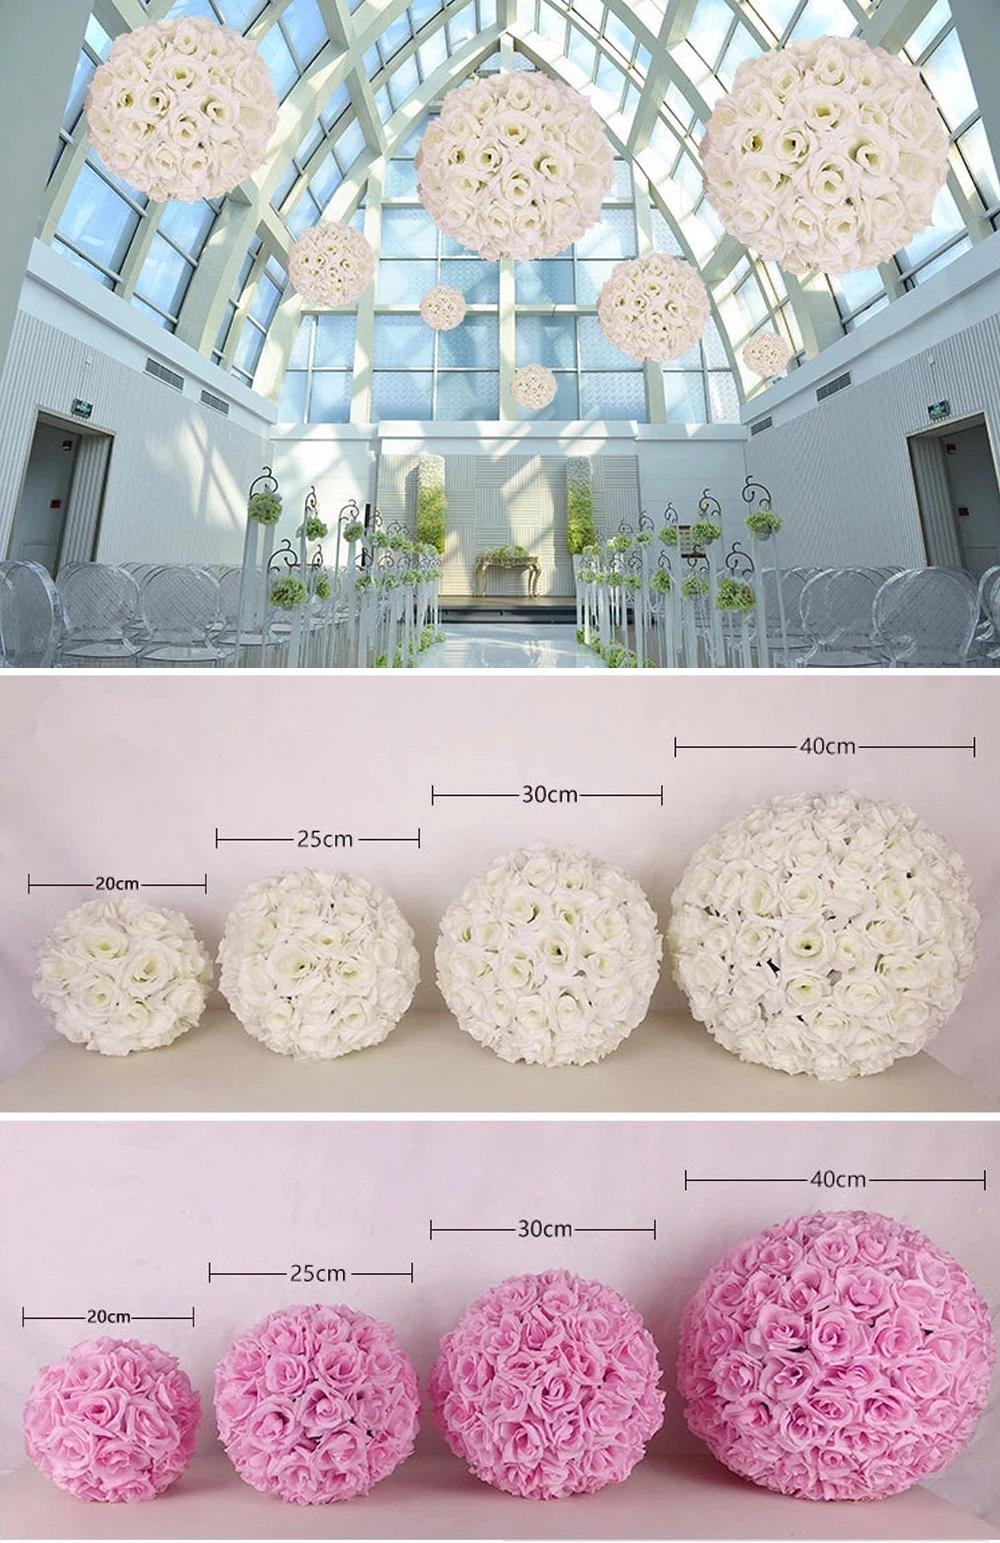 Artificial Rose Flower Ball for Wedding or Ceremony as Wedding Centerpiece